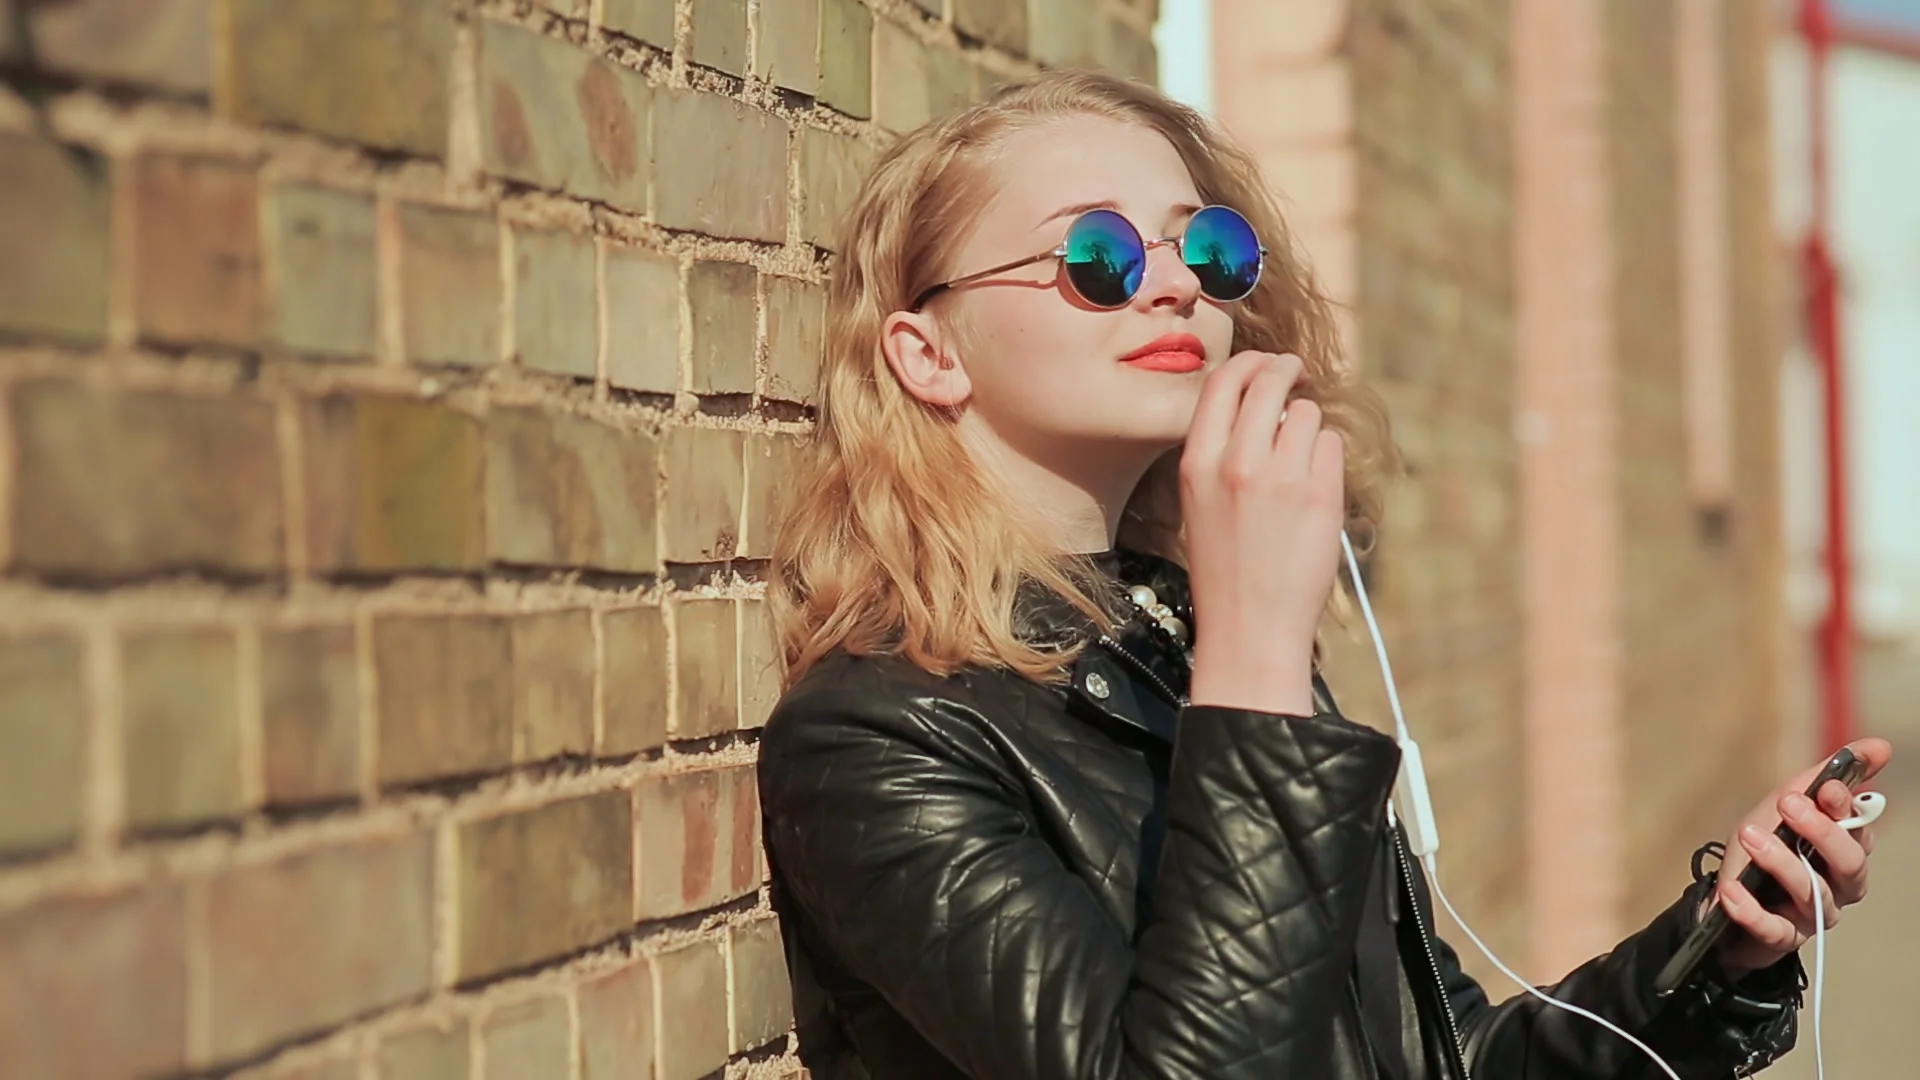 Attractive Blonde Girl With Sunglasses Stock Photo, Picture and Royalty  Free Image. Image 27473037.